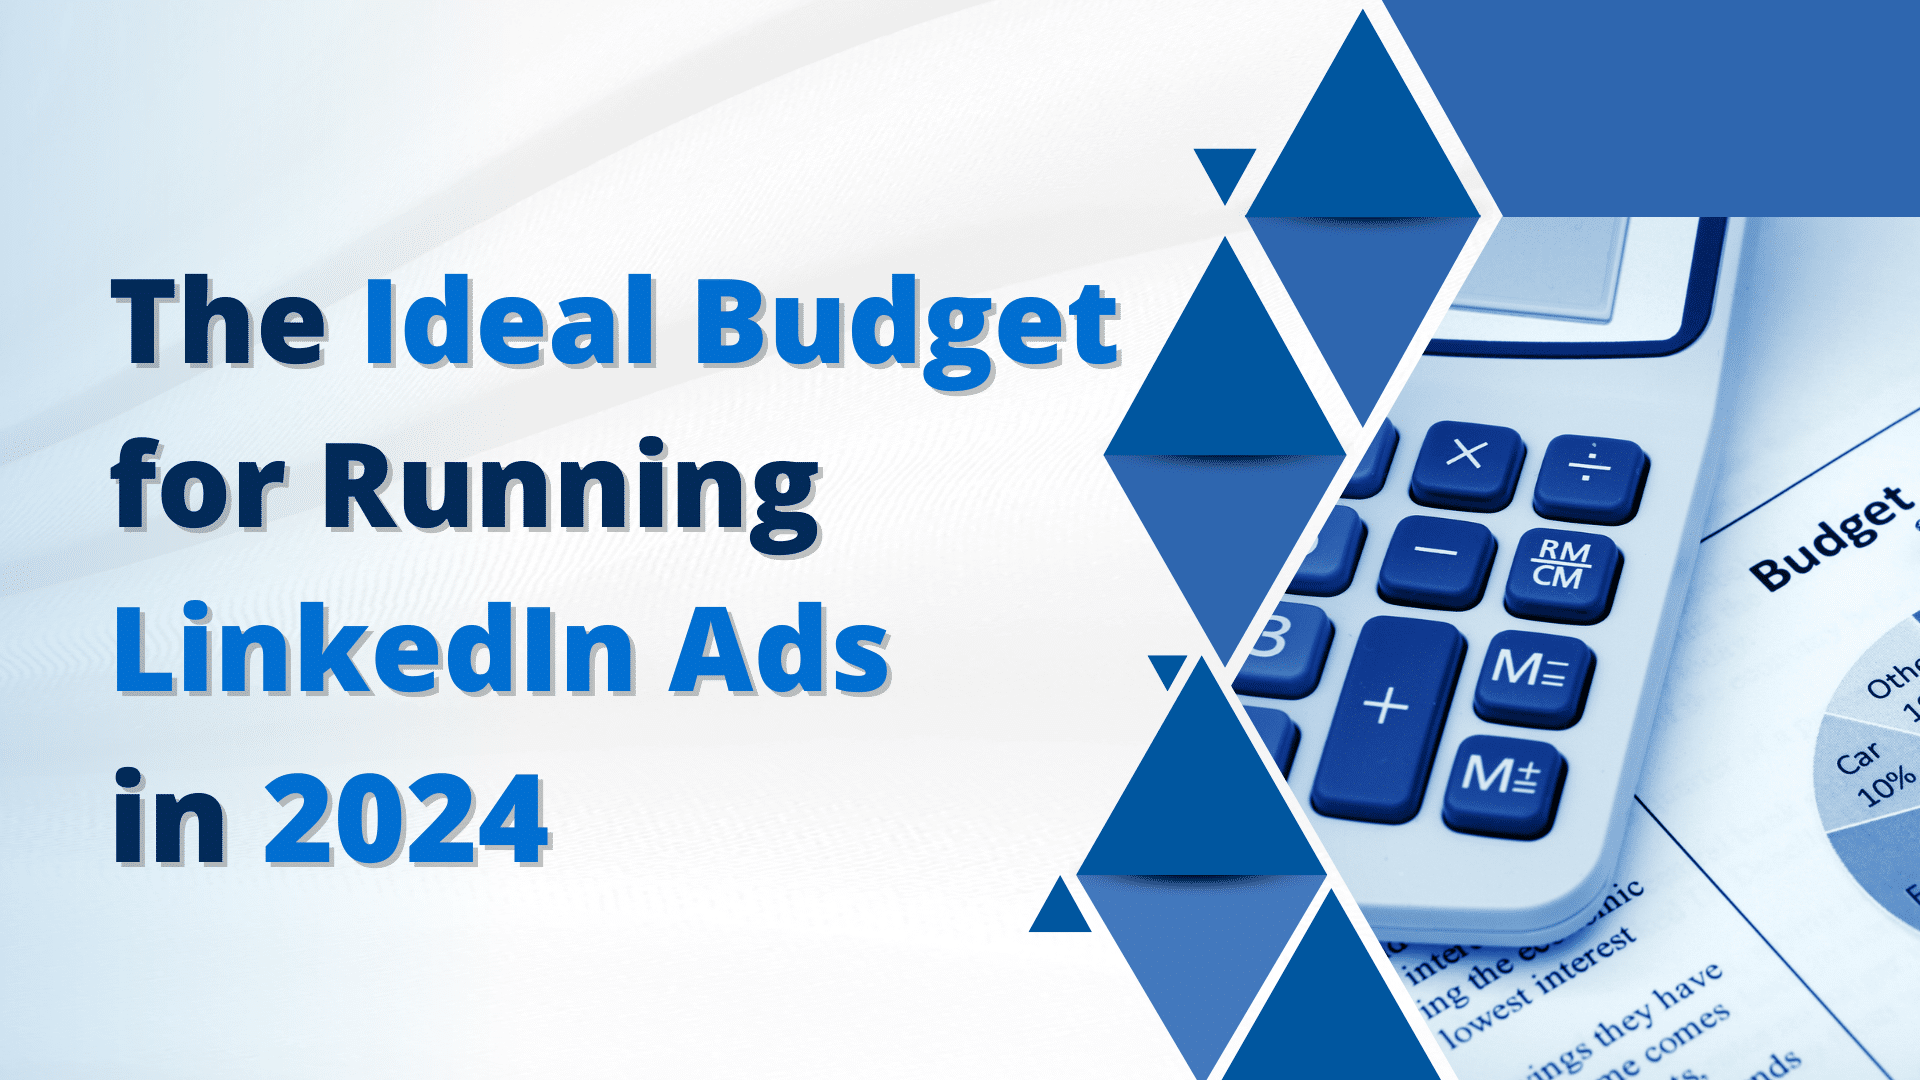 Ideal Budget for Running LinkedIn Ads in 2024